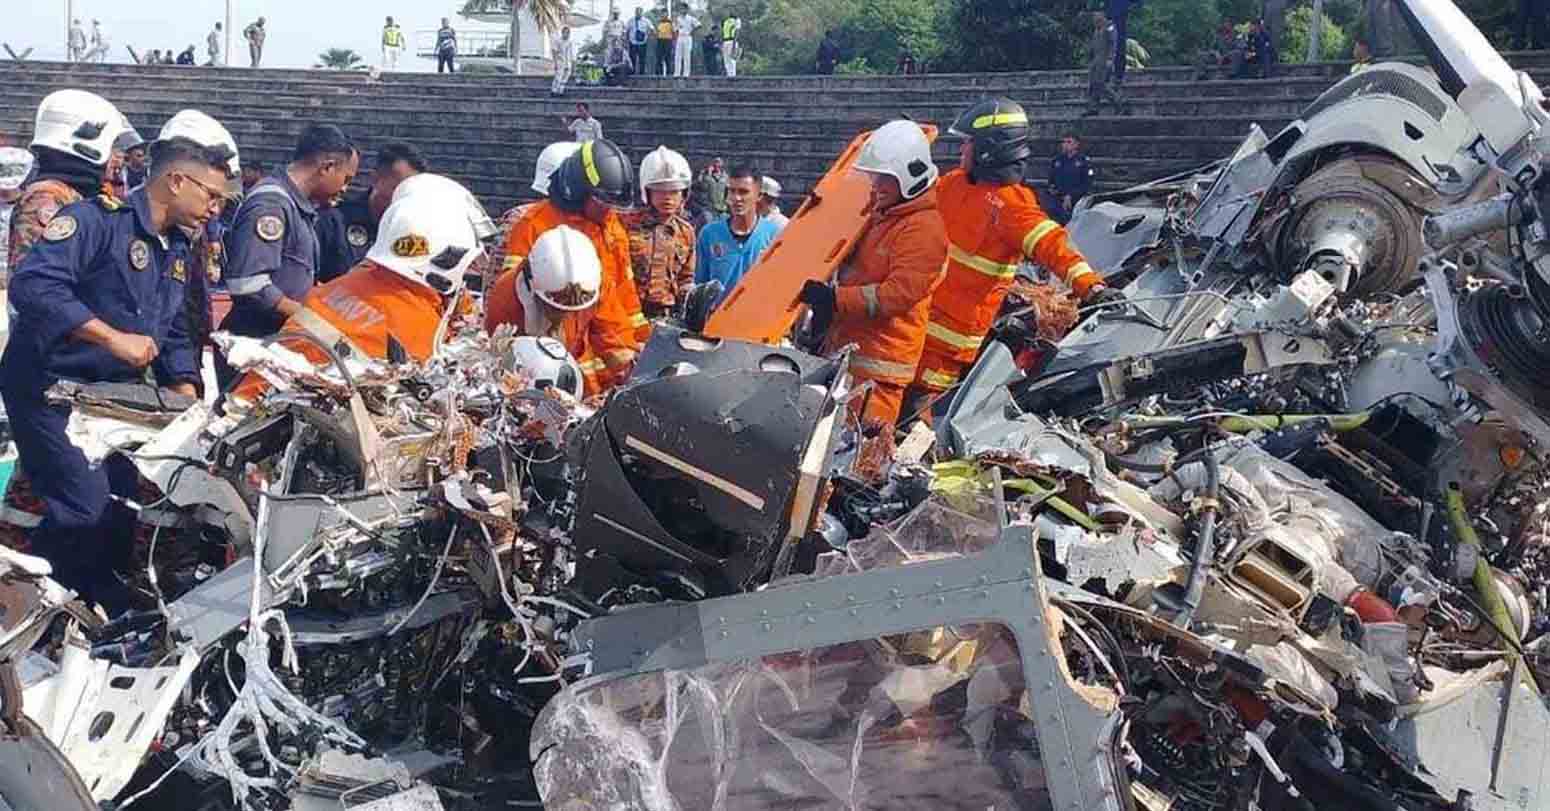 2 Malaysian Military Helicopters Collide And Crash, Killing 10 People On Board